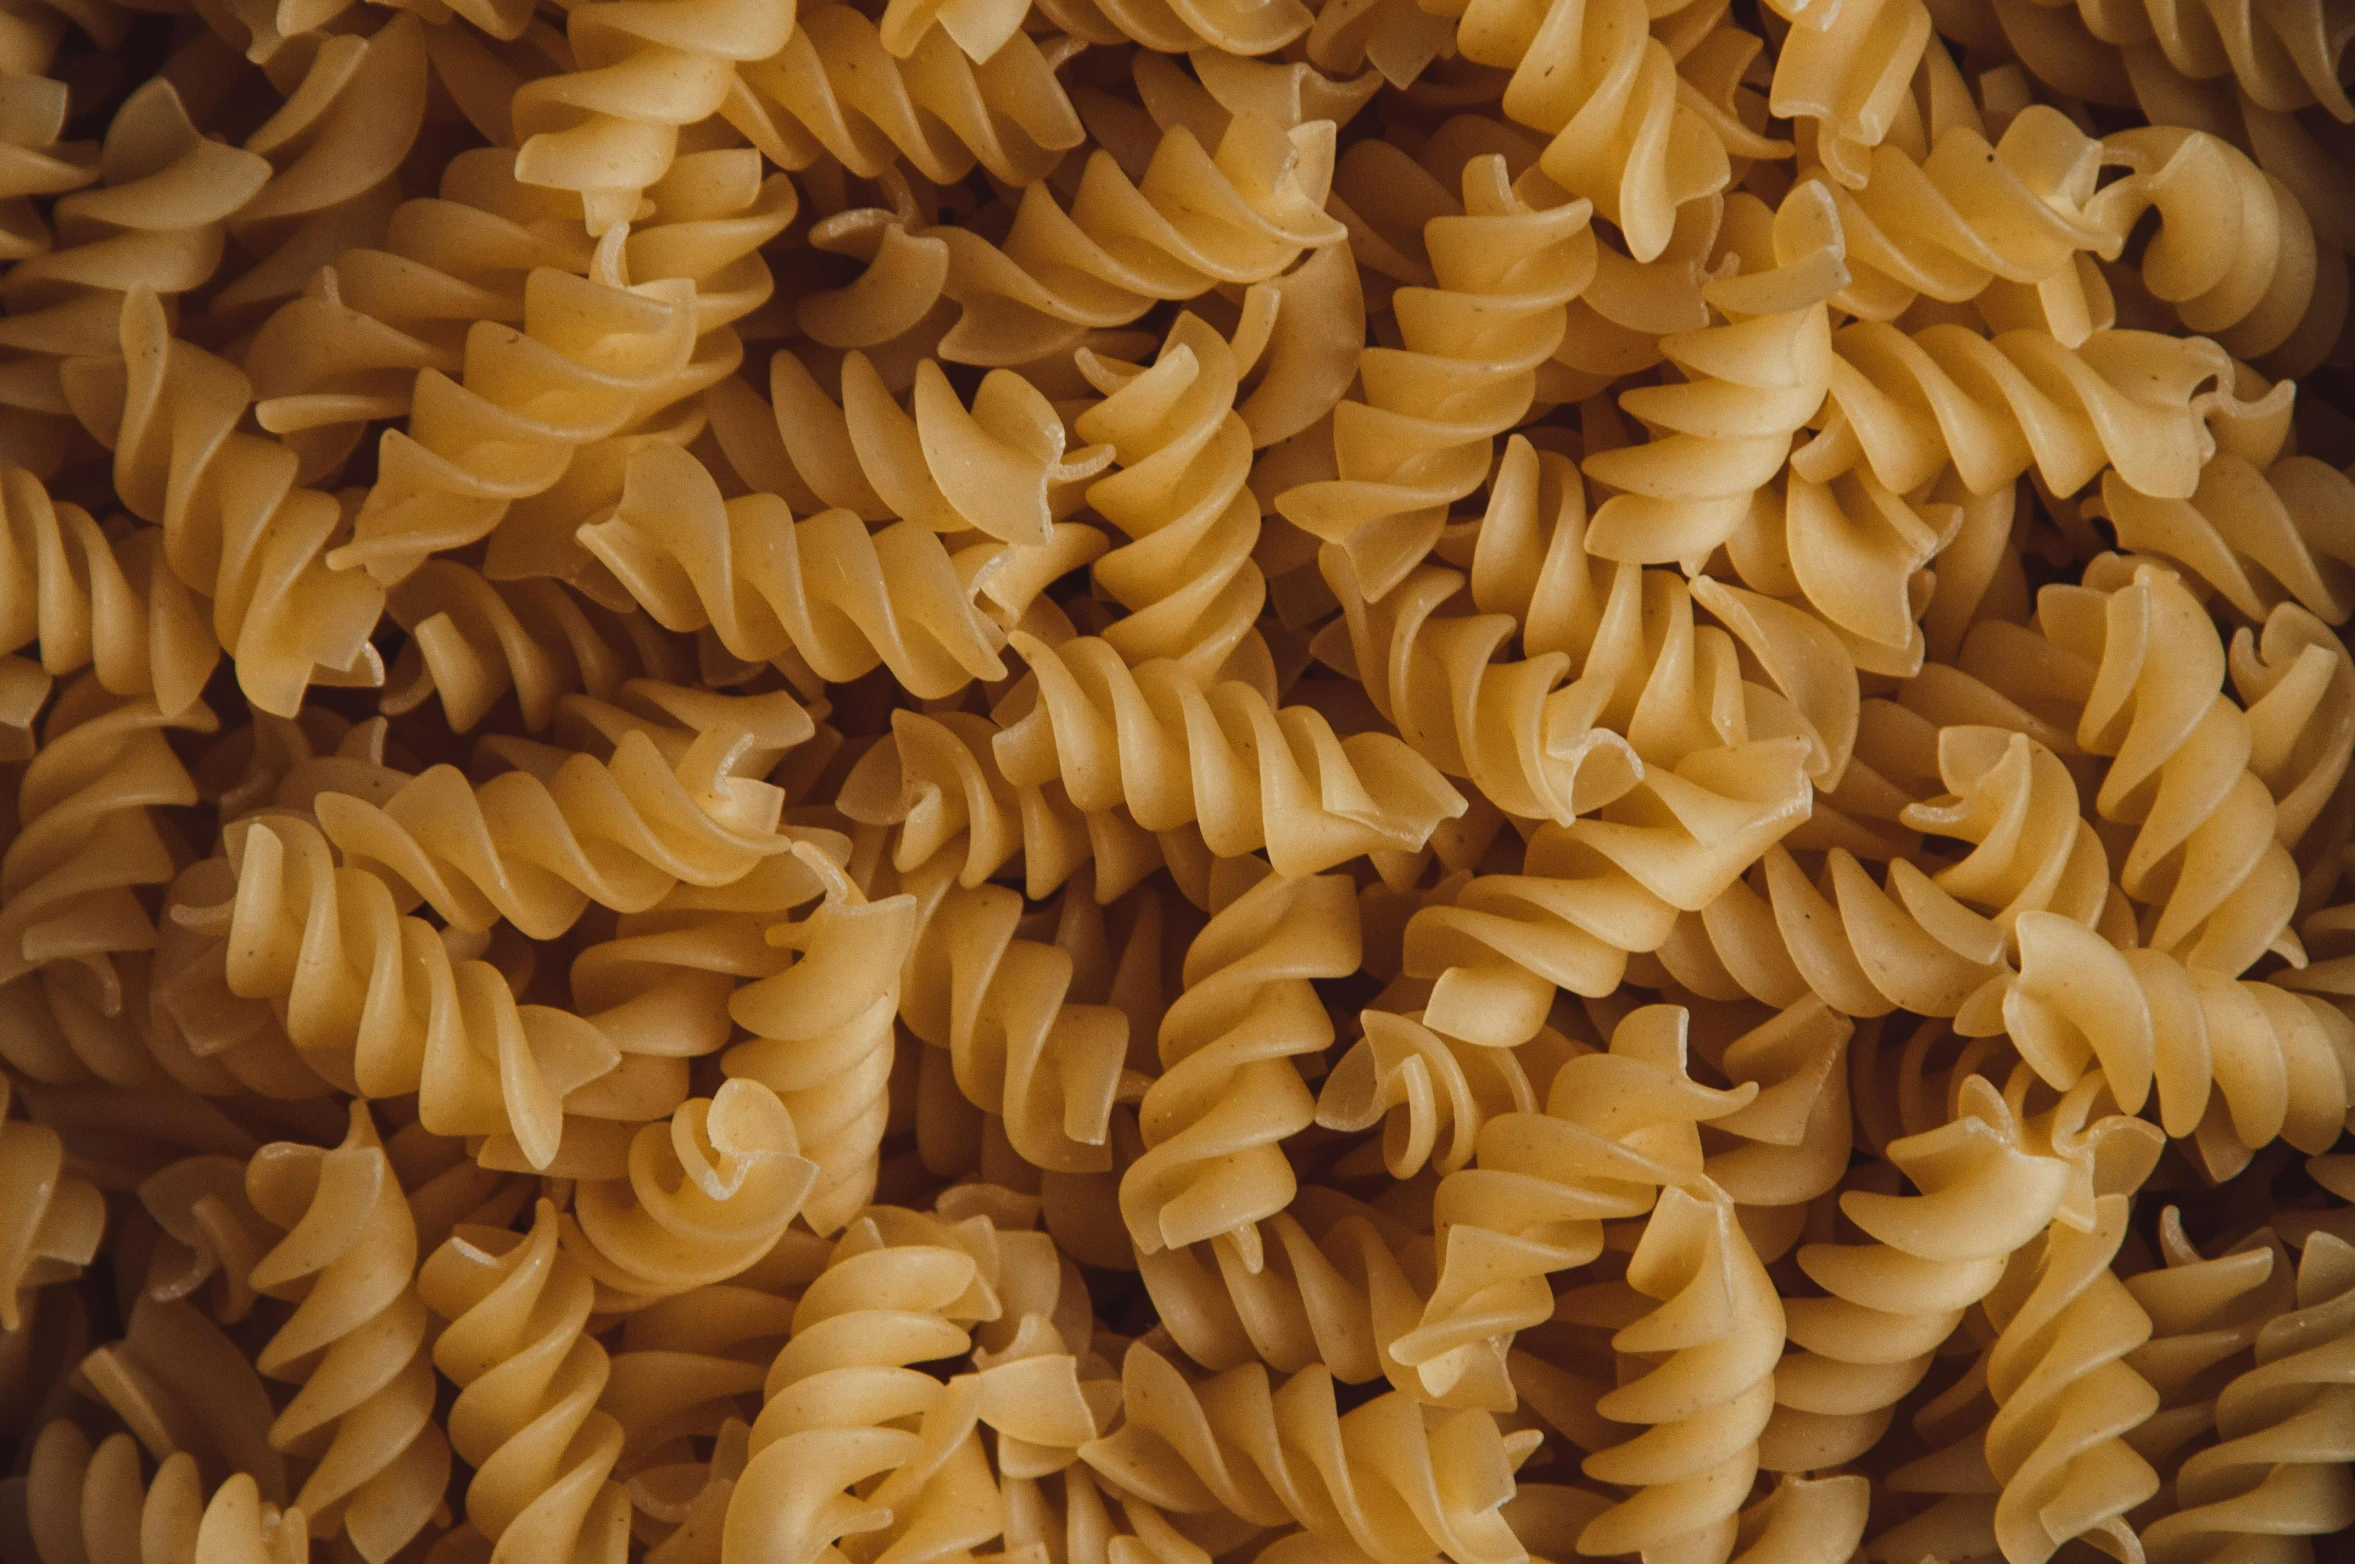 closeup view of large pile of cooked noodles